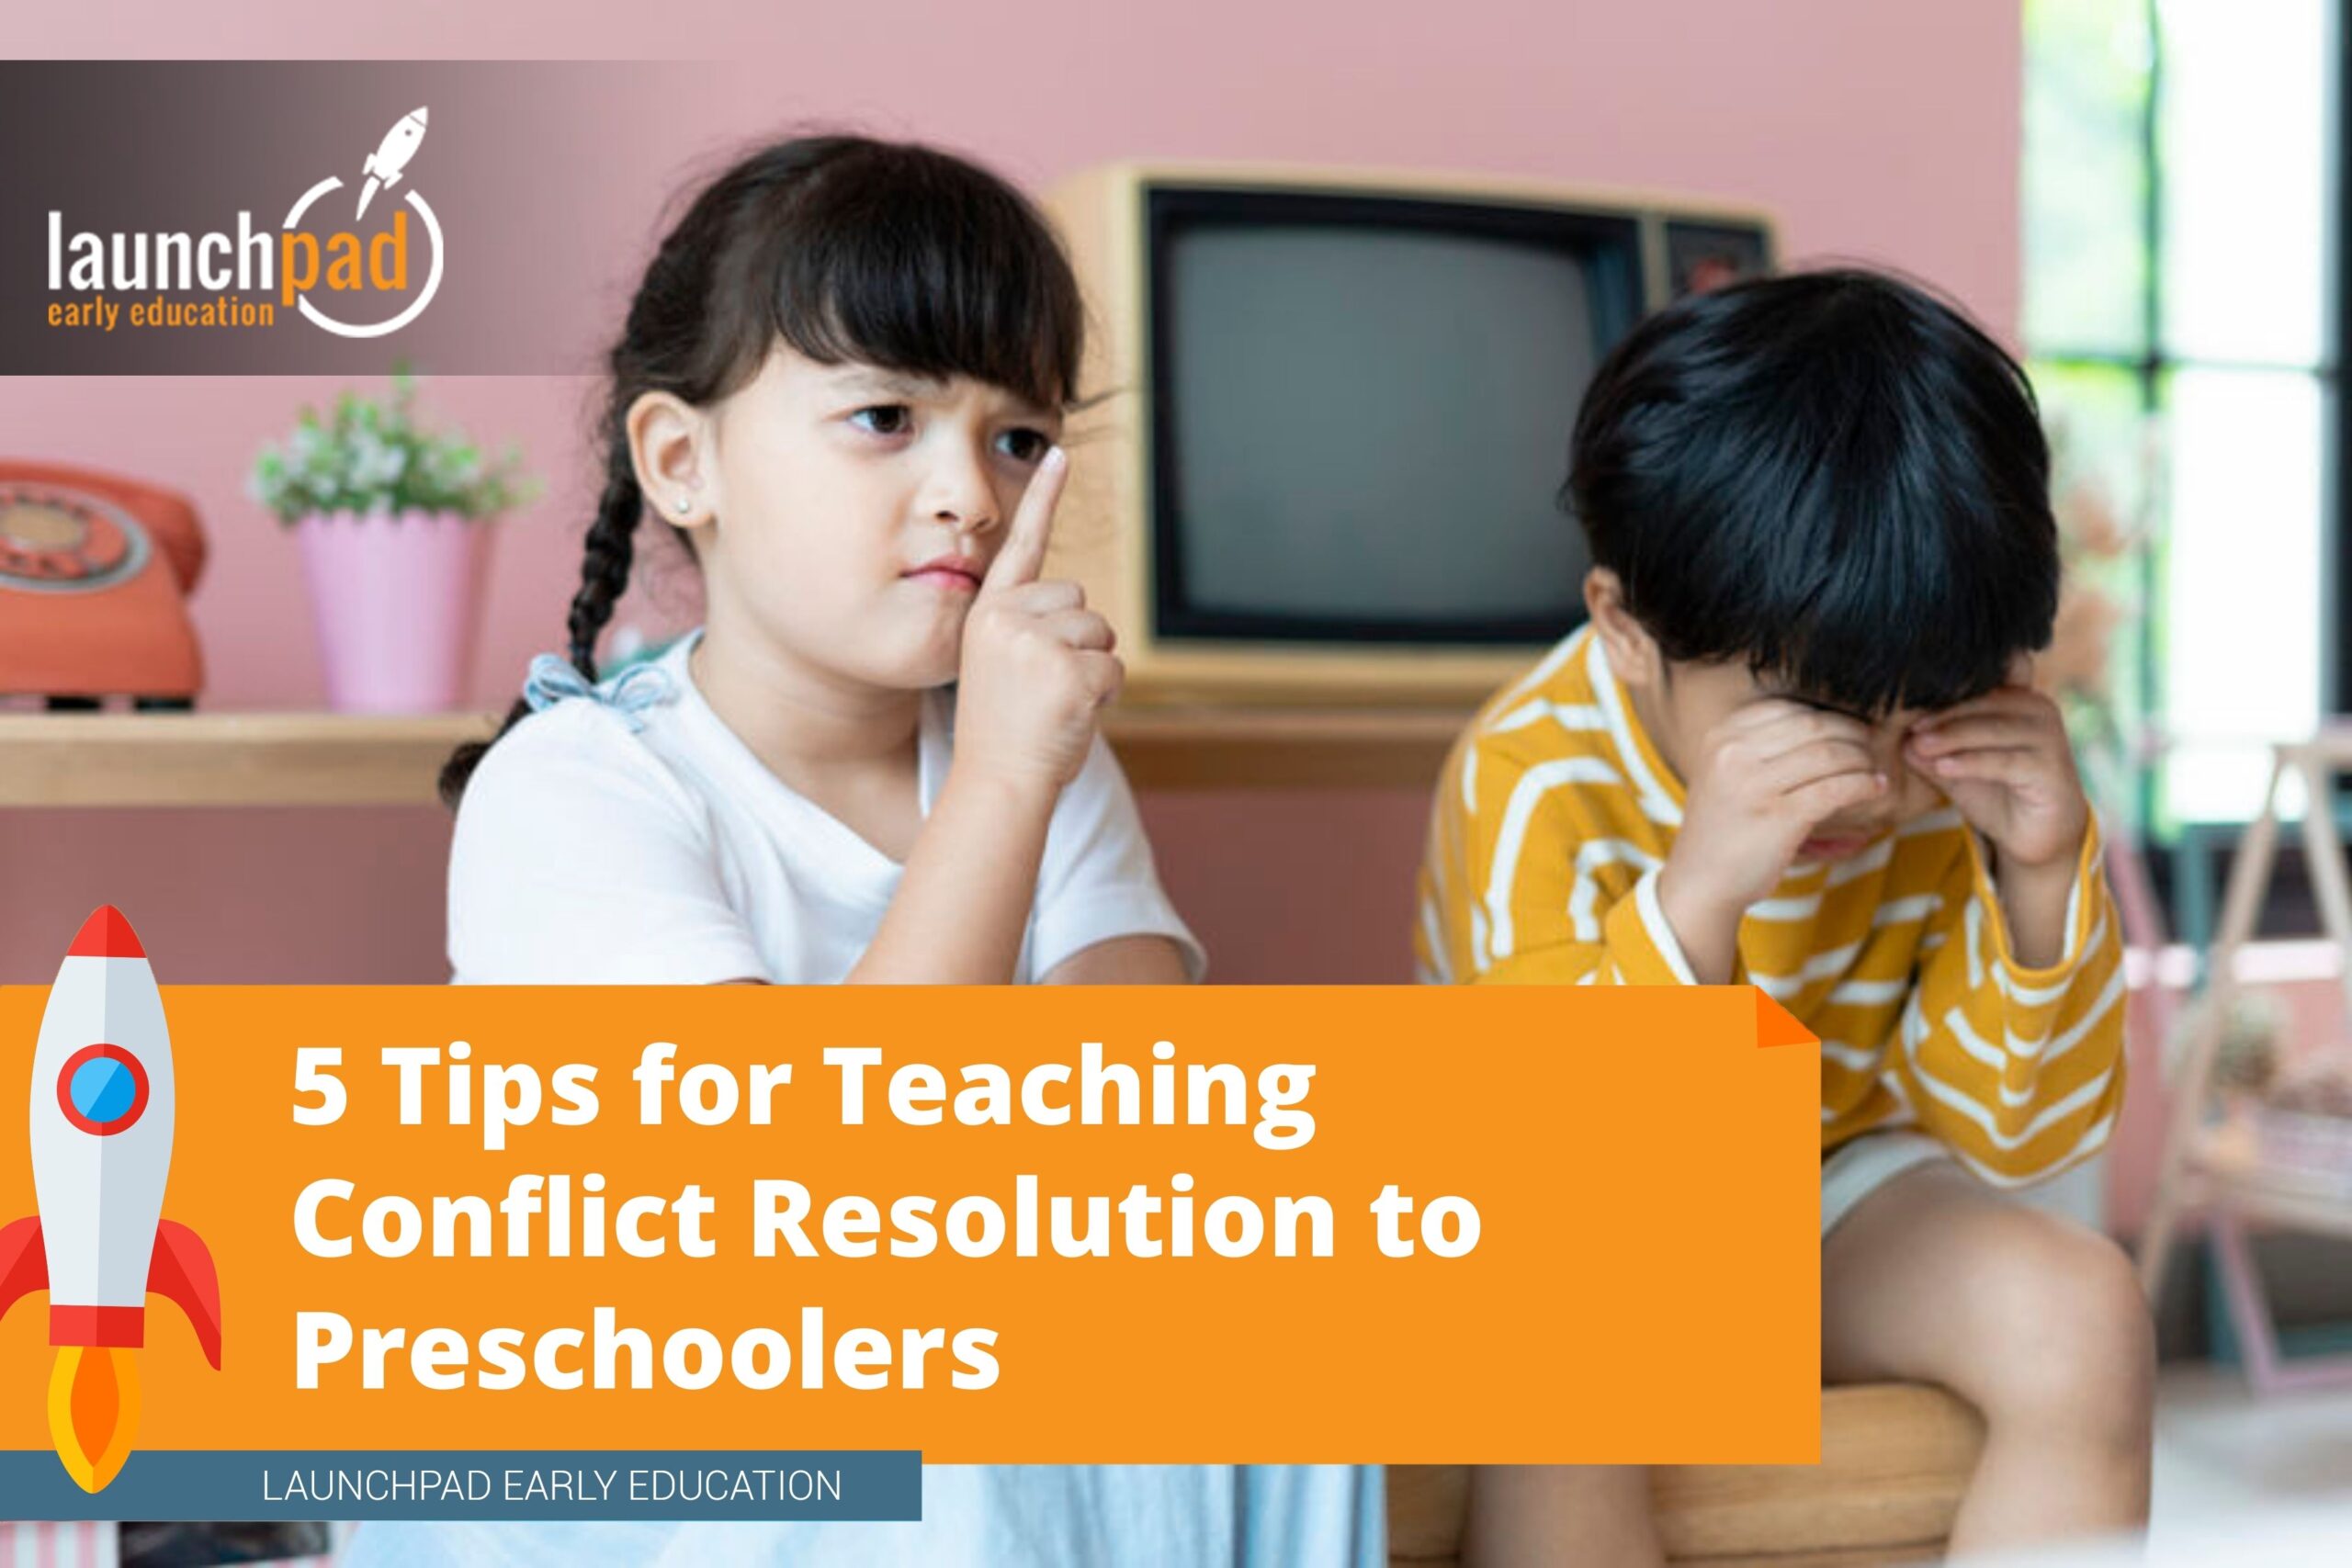 5 tips on conflict resolution